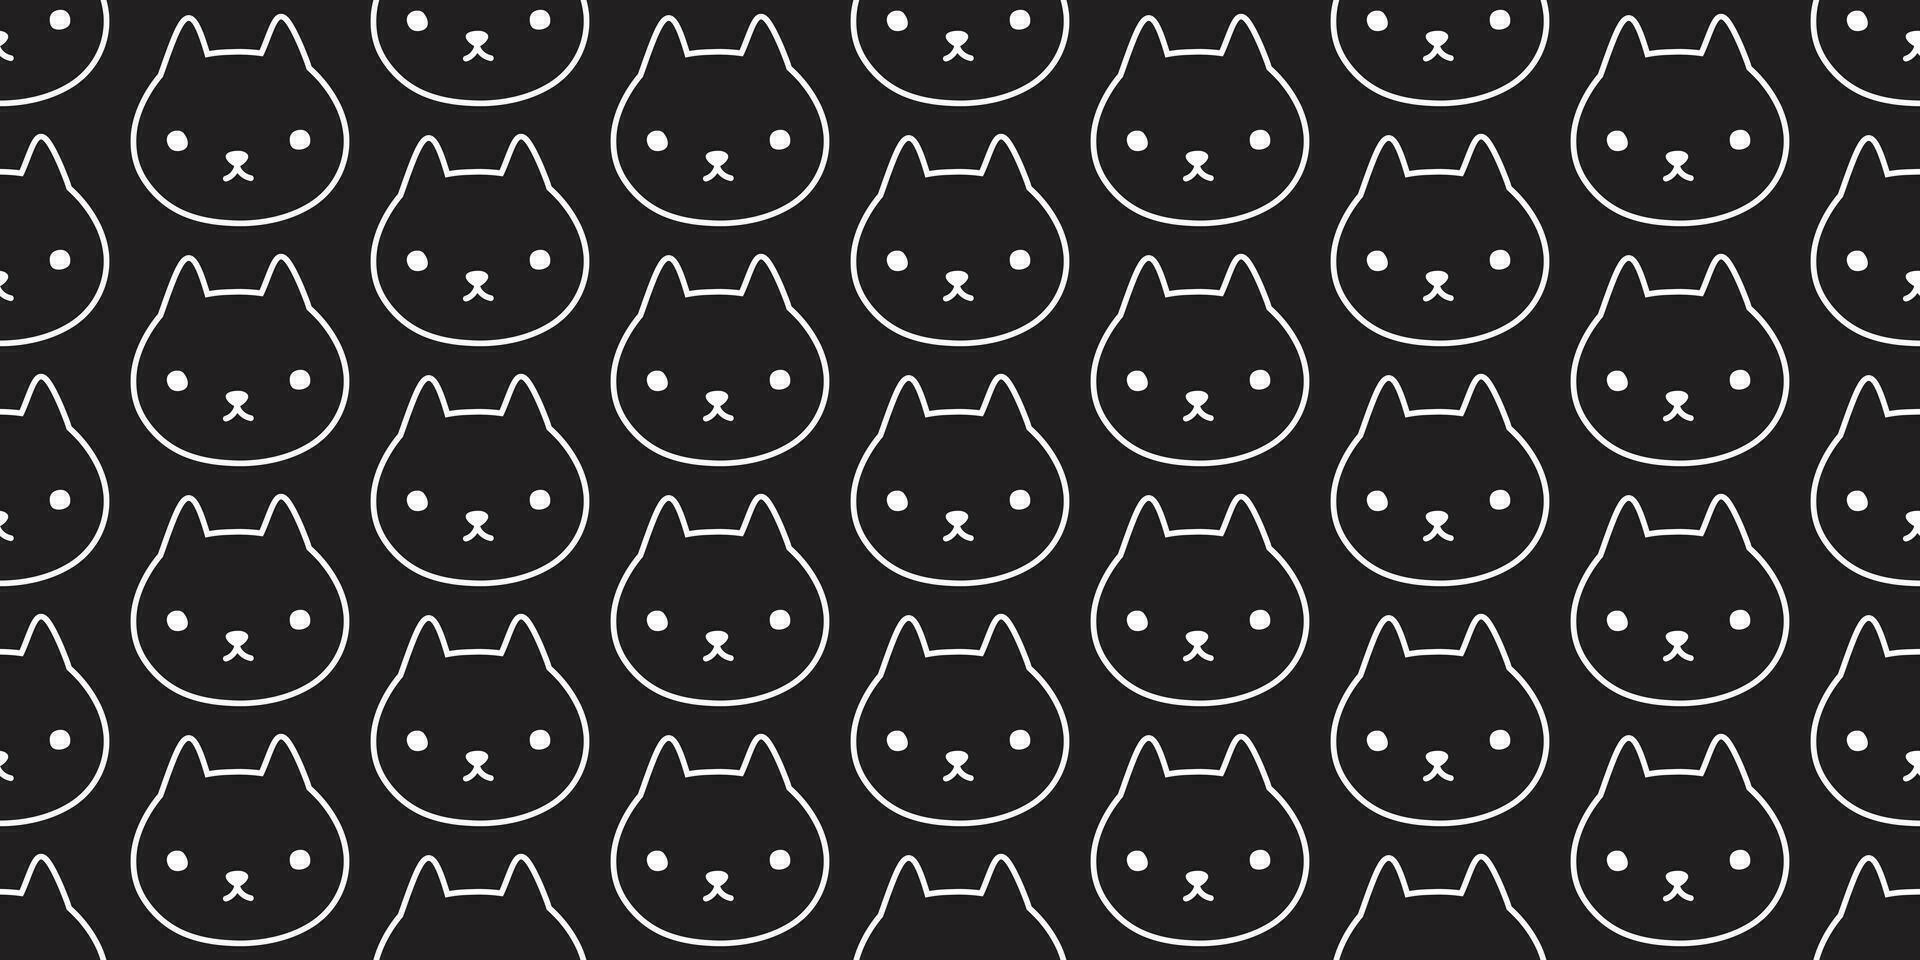 cat seamless pattern vector kitten head face cartoon scarf isolated tile wallpaper repeat background illustration doodle black design